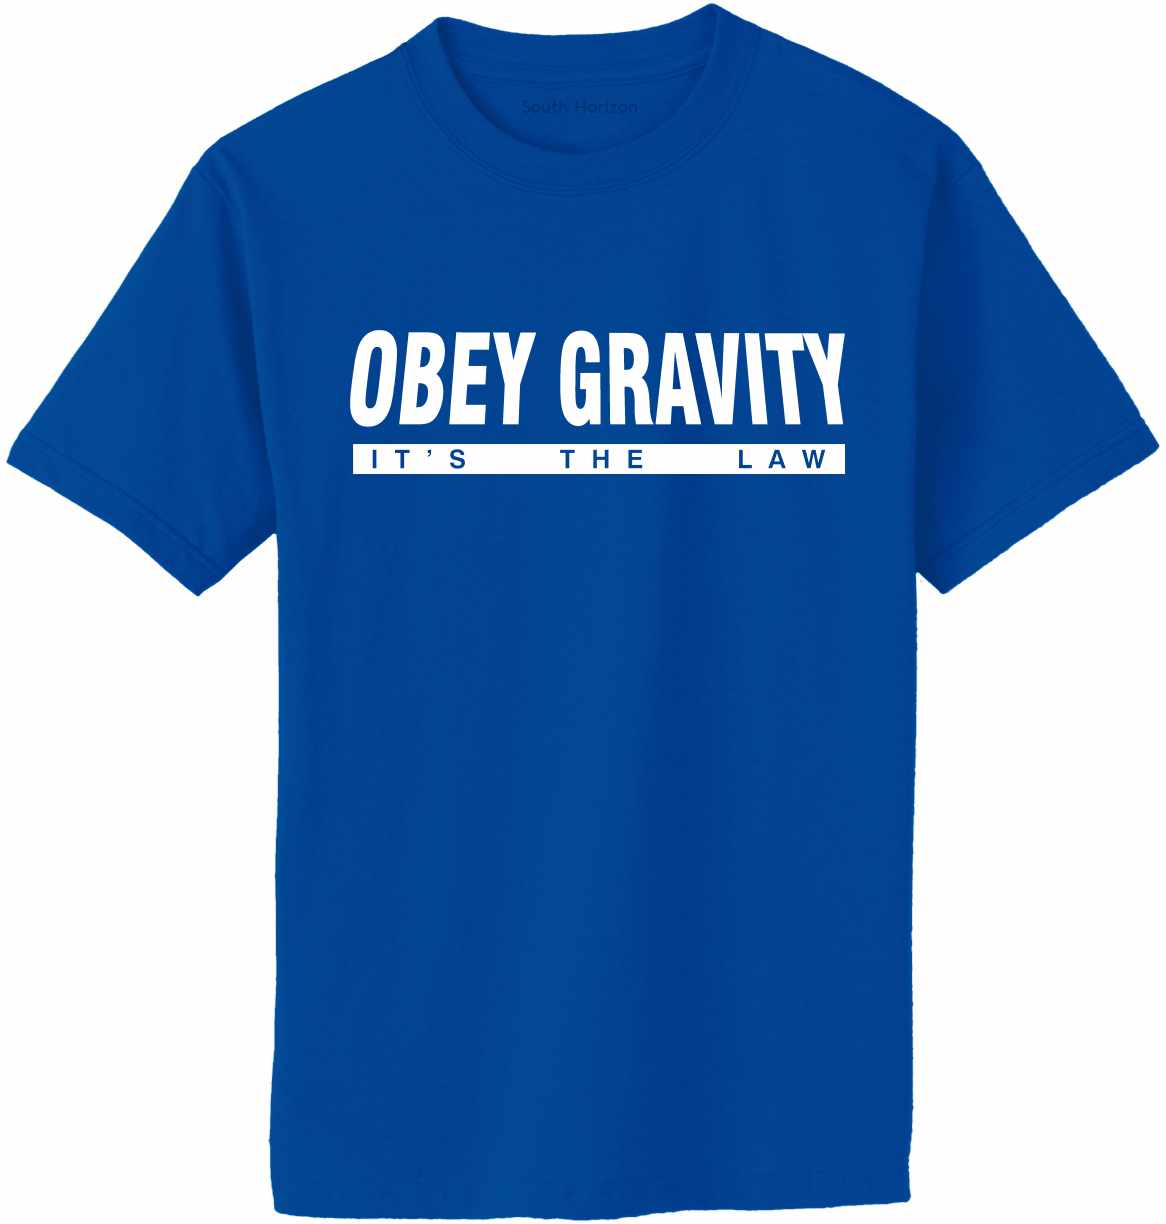 OBEY GRAVITY, It's the Law Adult T-Shirt